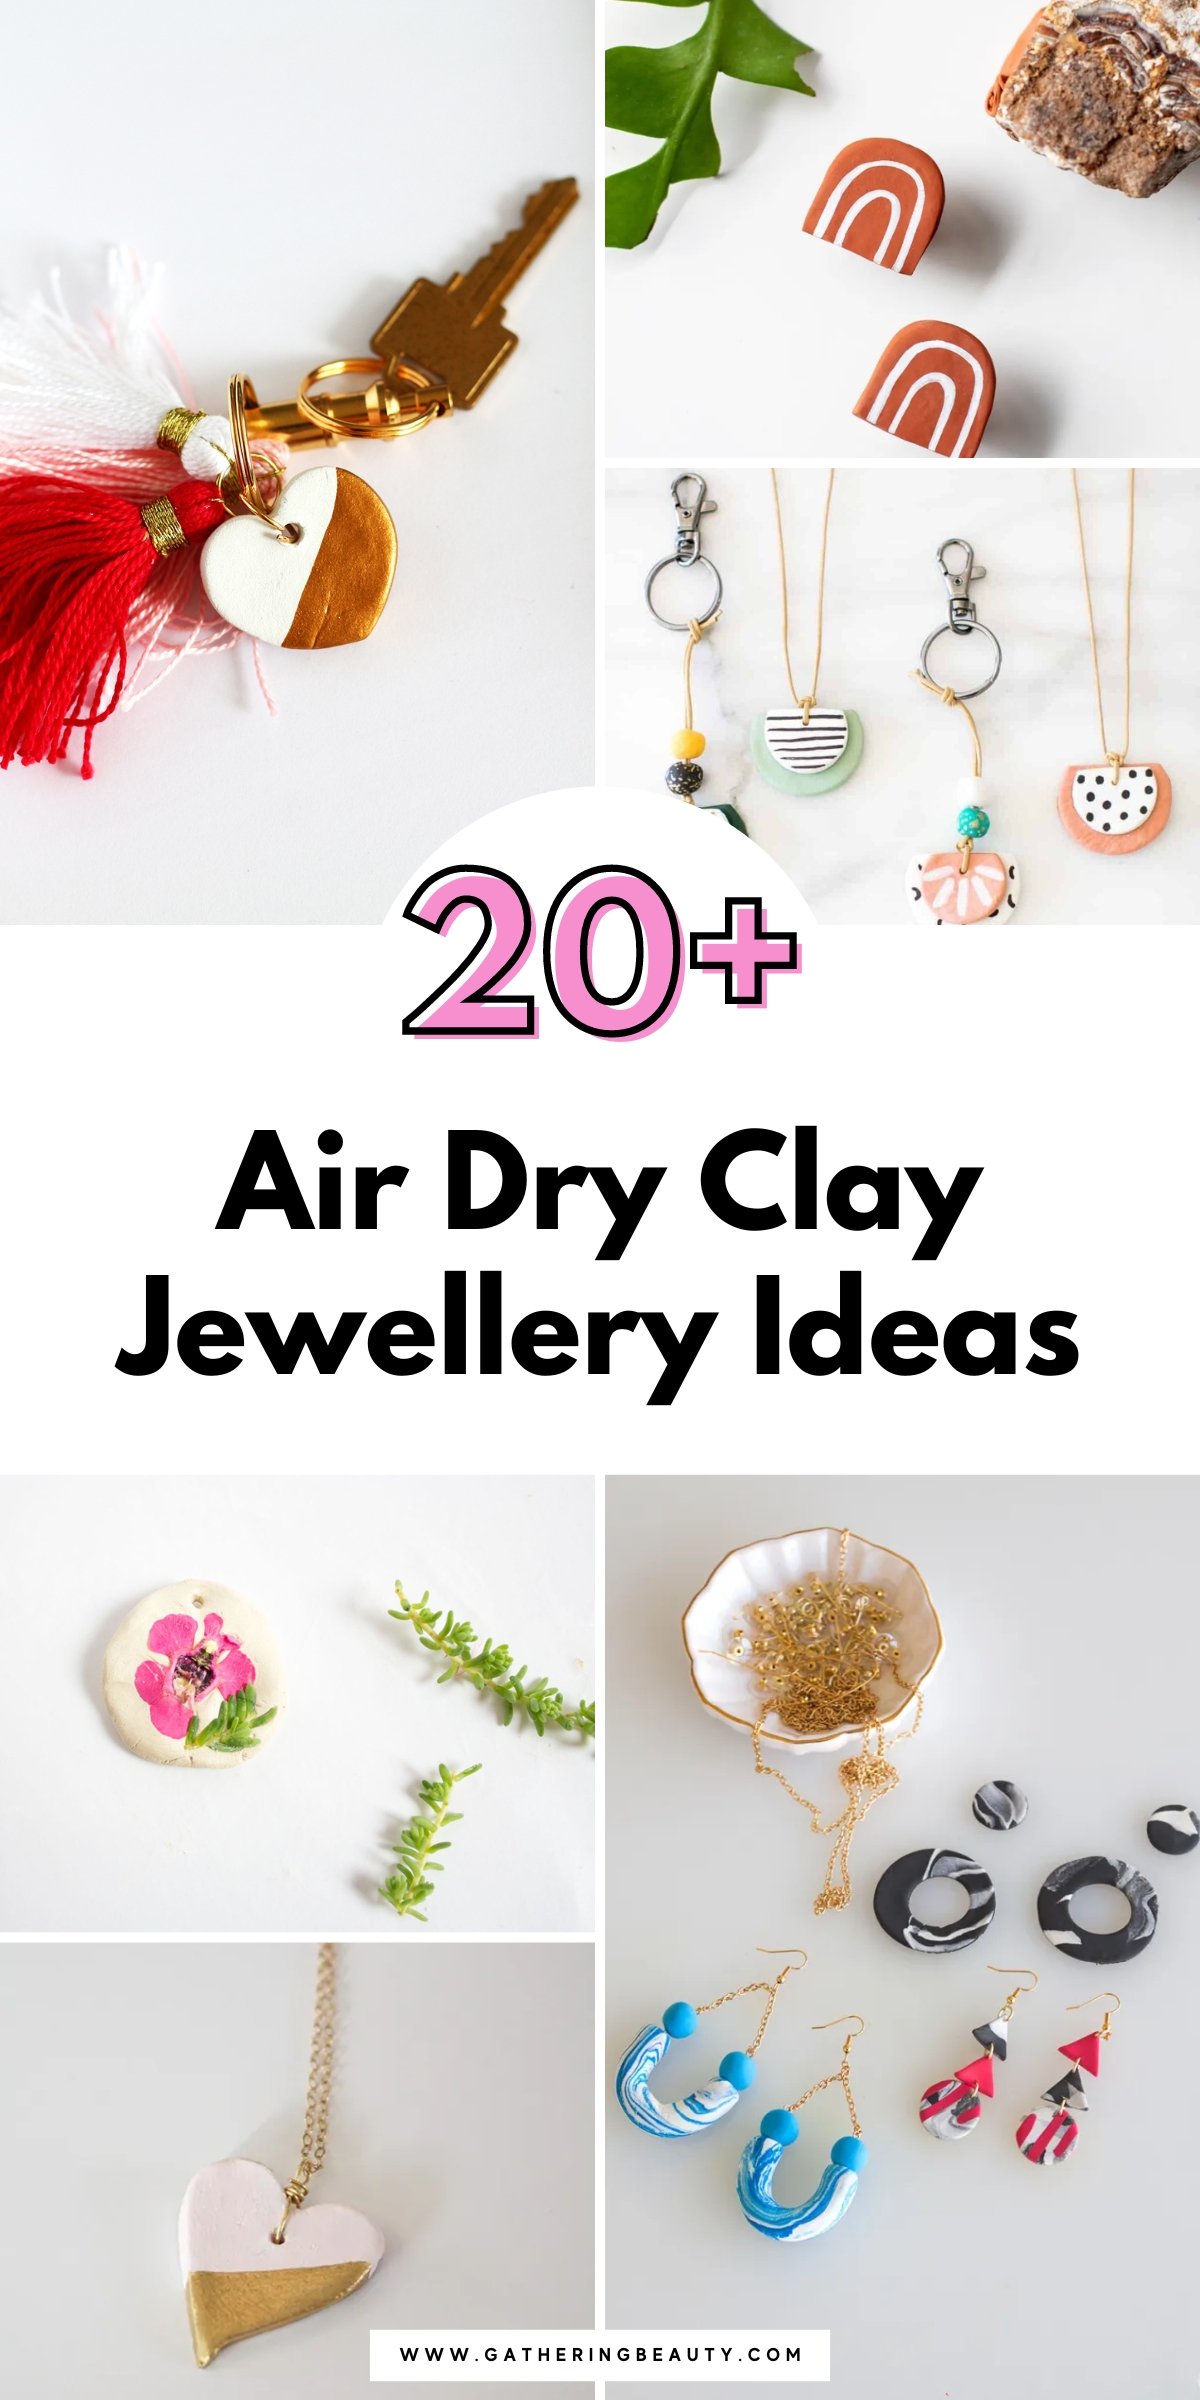 Jewelry Made Easy with Makin's Air Dry Clay - 100 Directions